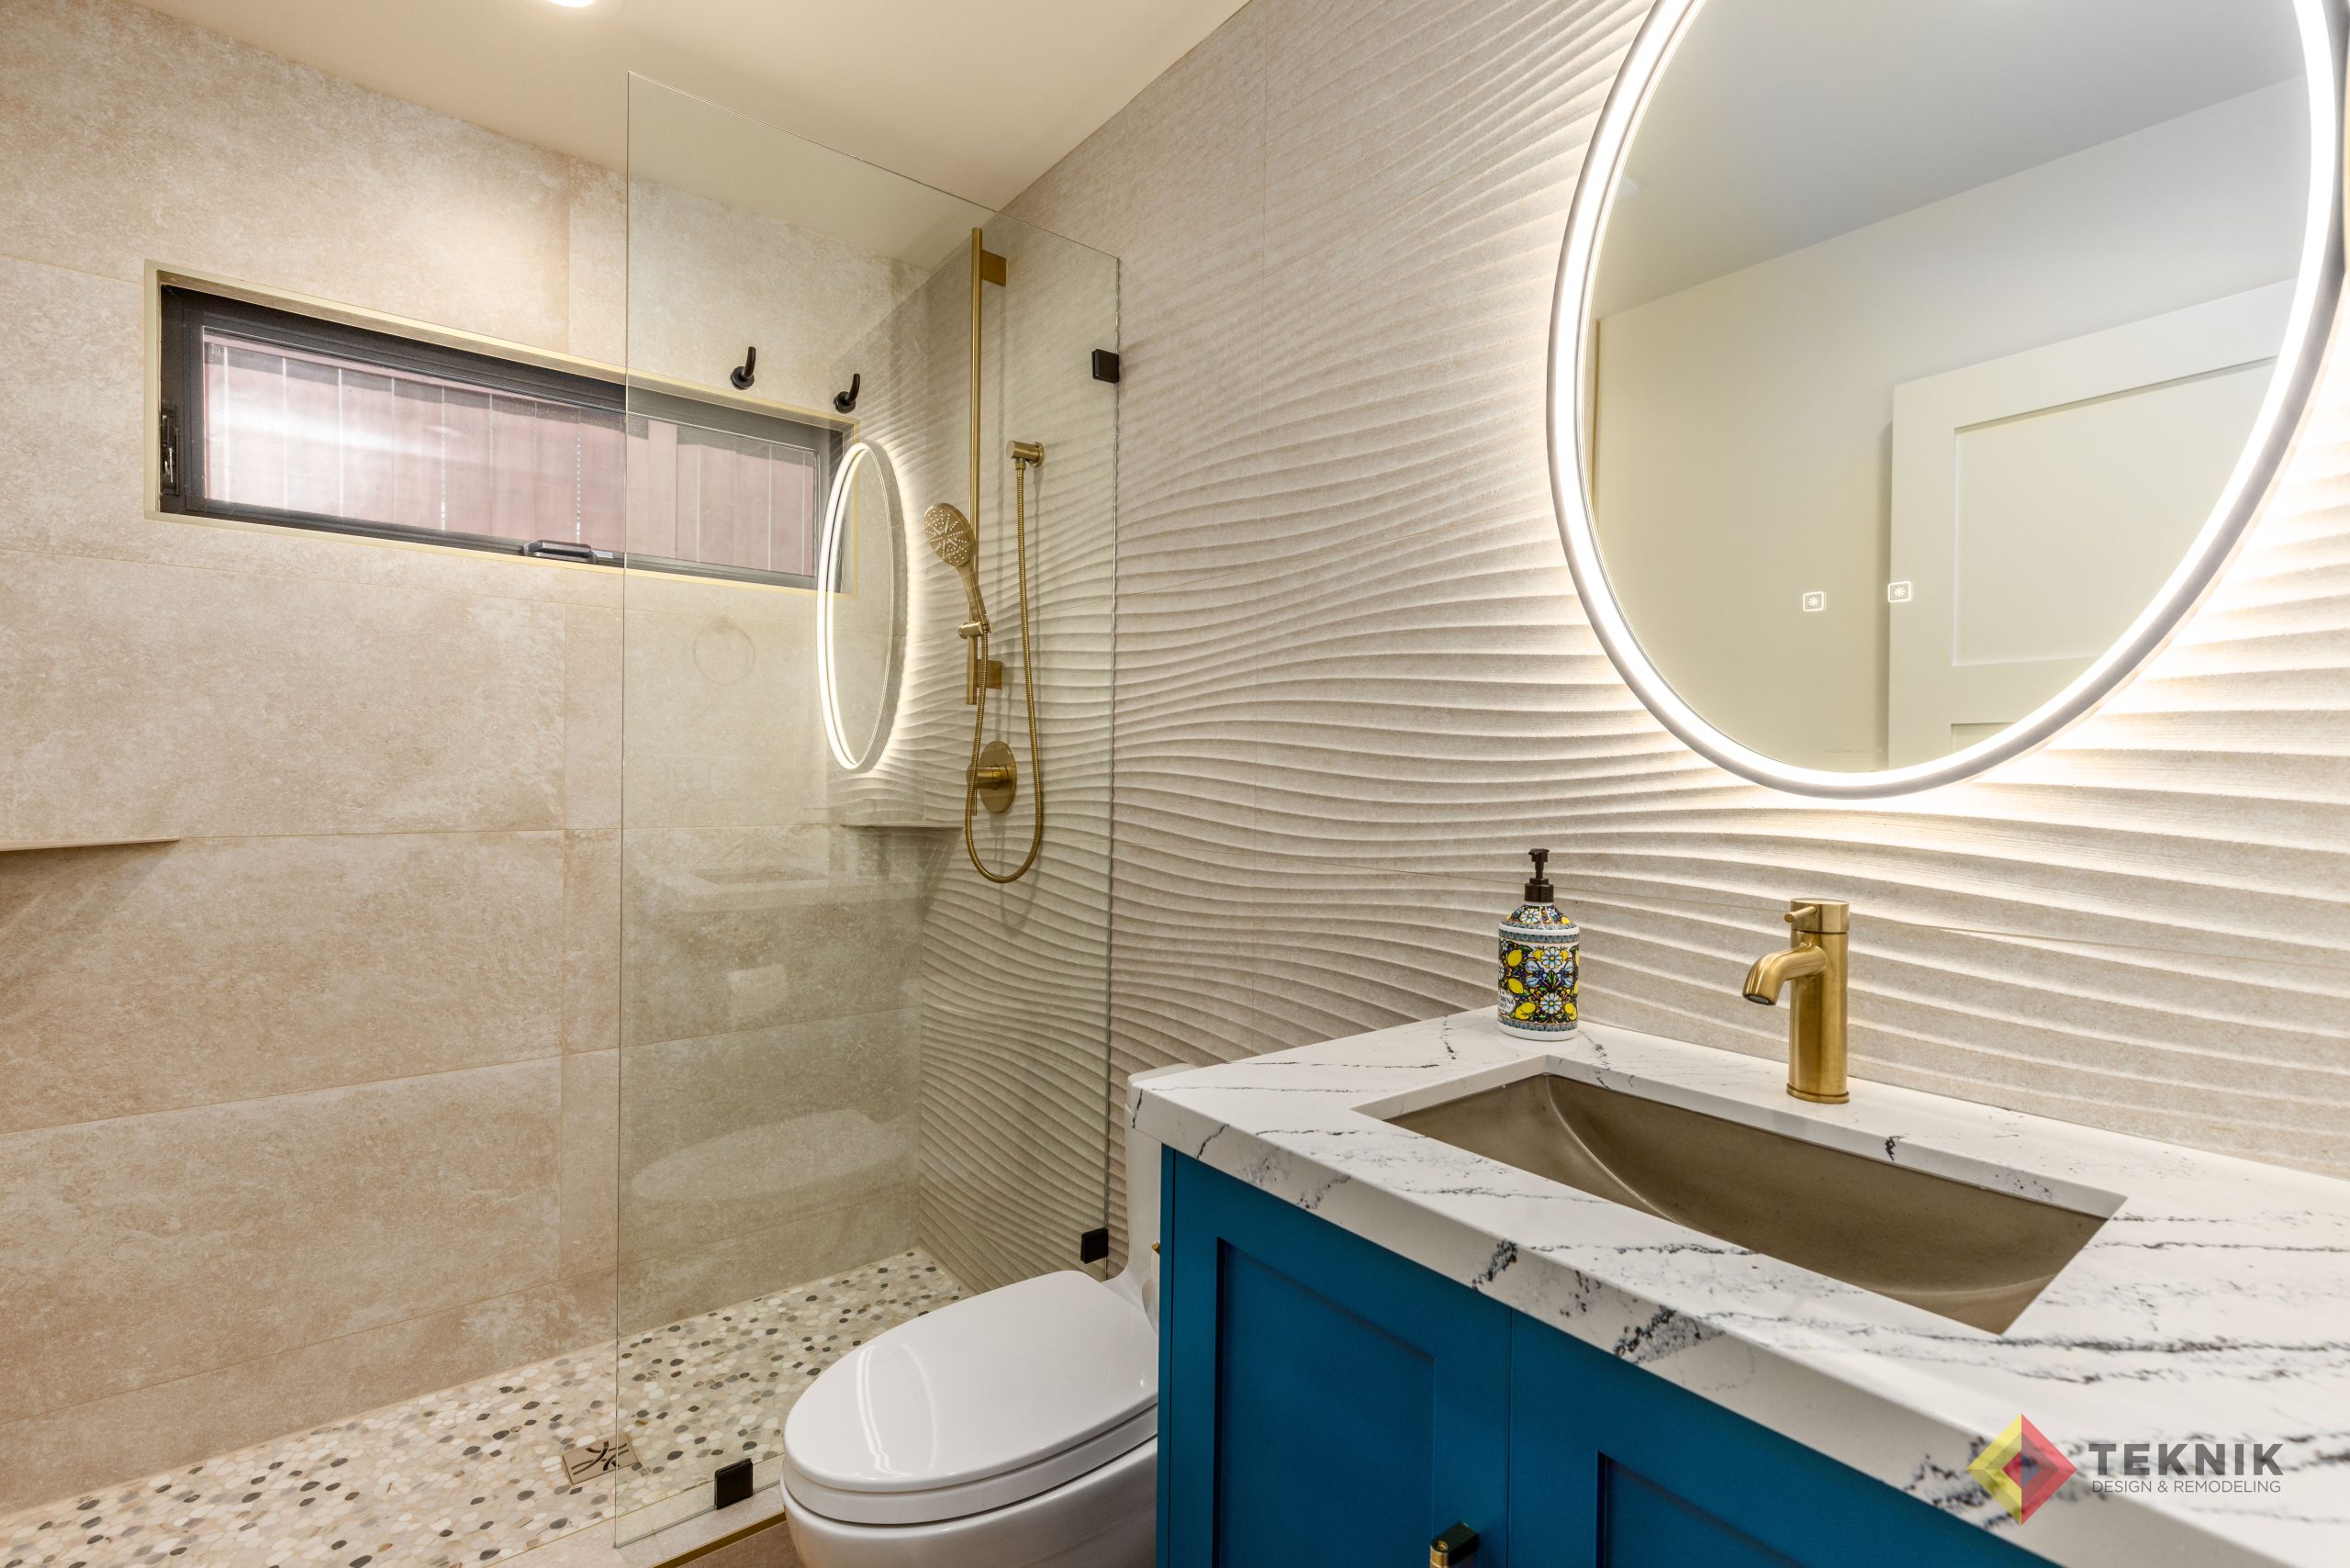 Bathroom remodeling and renovation ideas